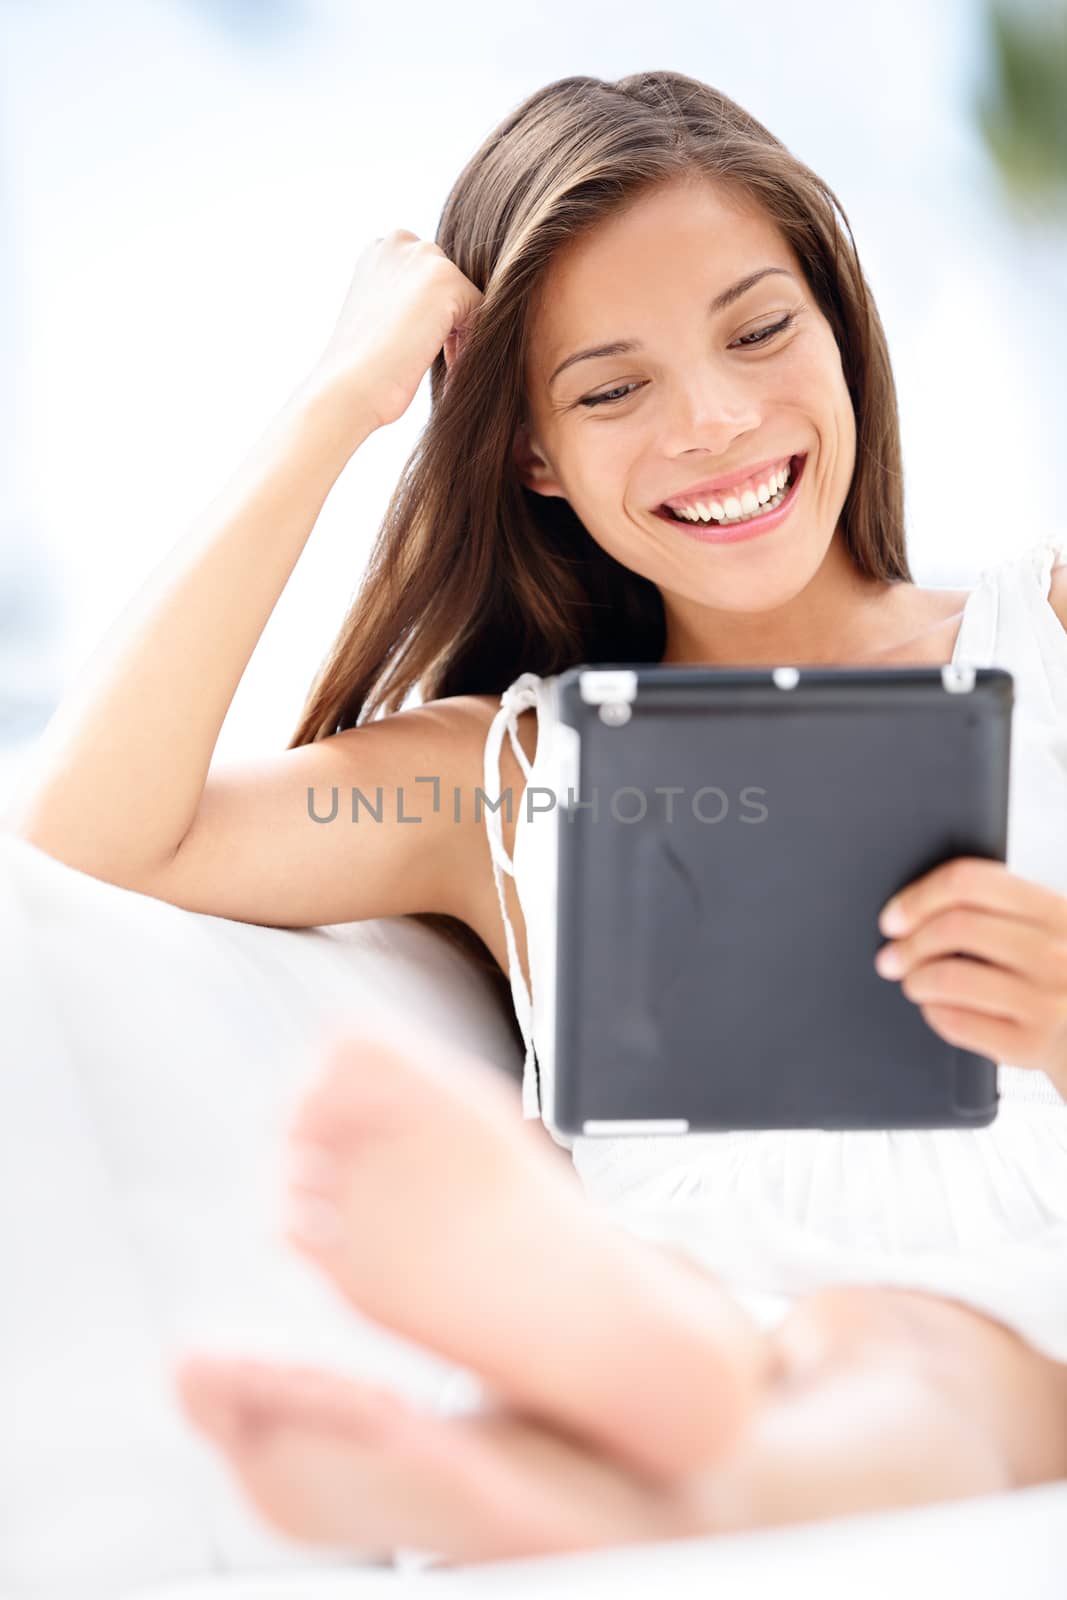 Tablet computer. Woman young smiling mixed race reading relaxed on black tablet